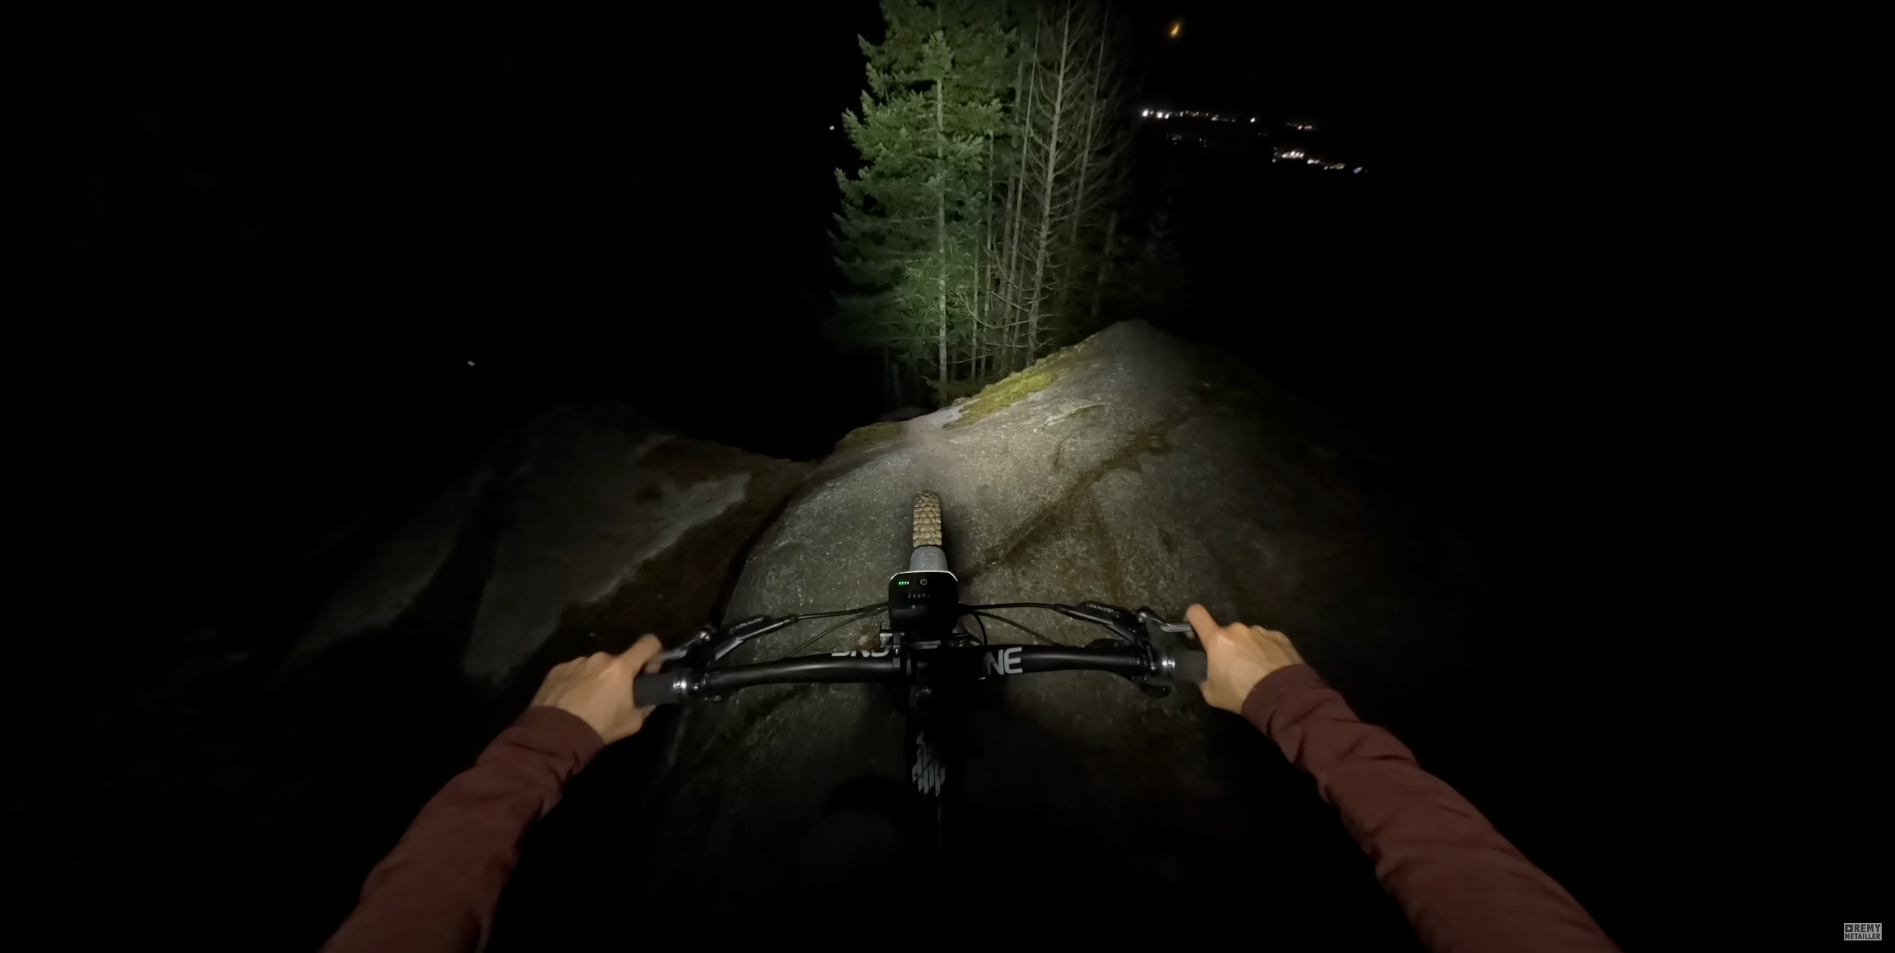 Mountain biking at night pushed to the limits! Credit: Rémy Métailler